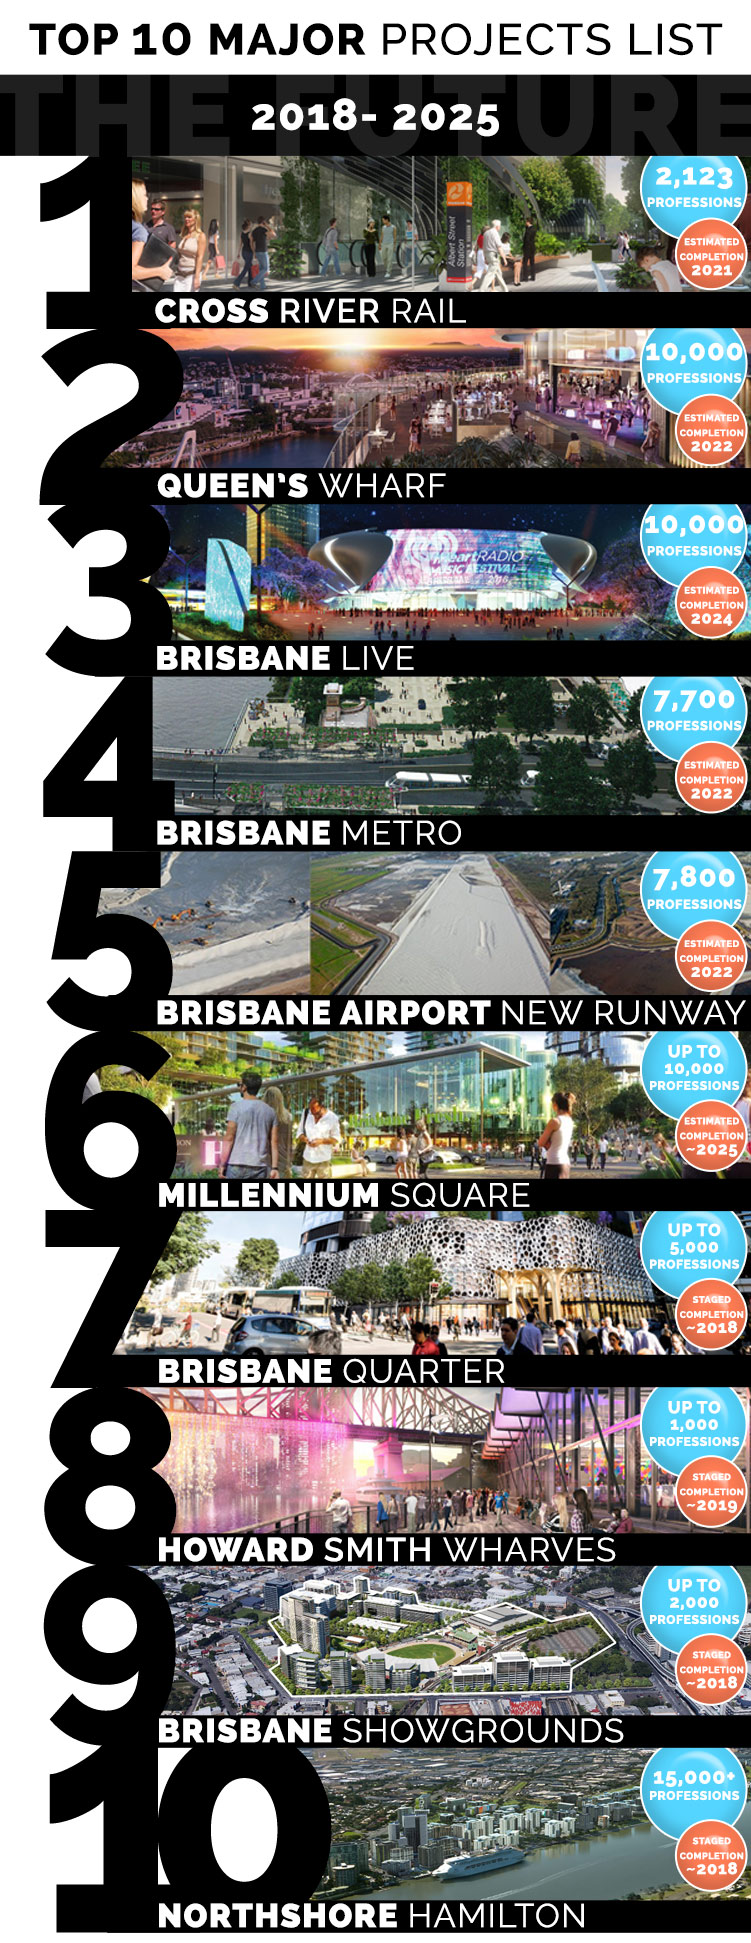 A list of Brisbane's major projects from 2018 to 2025